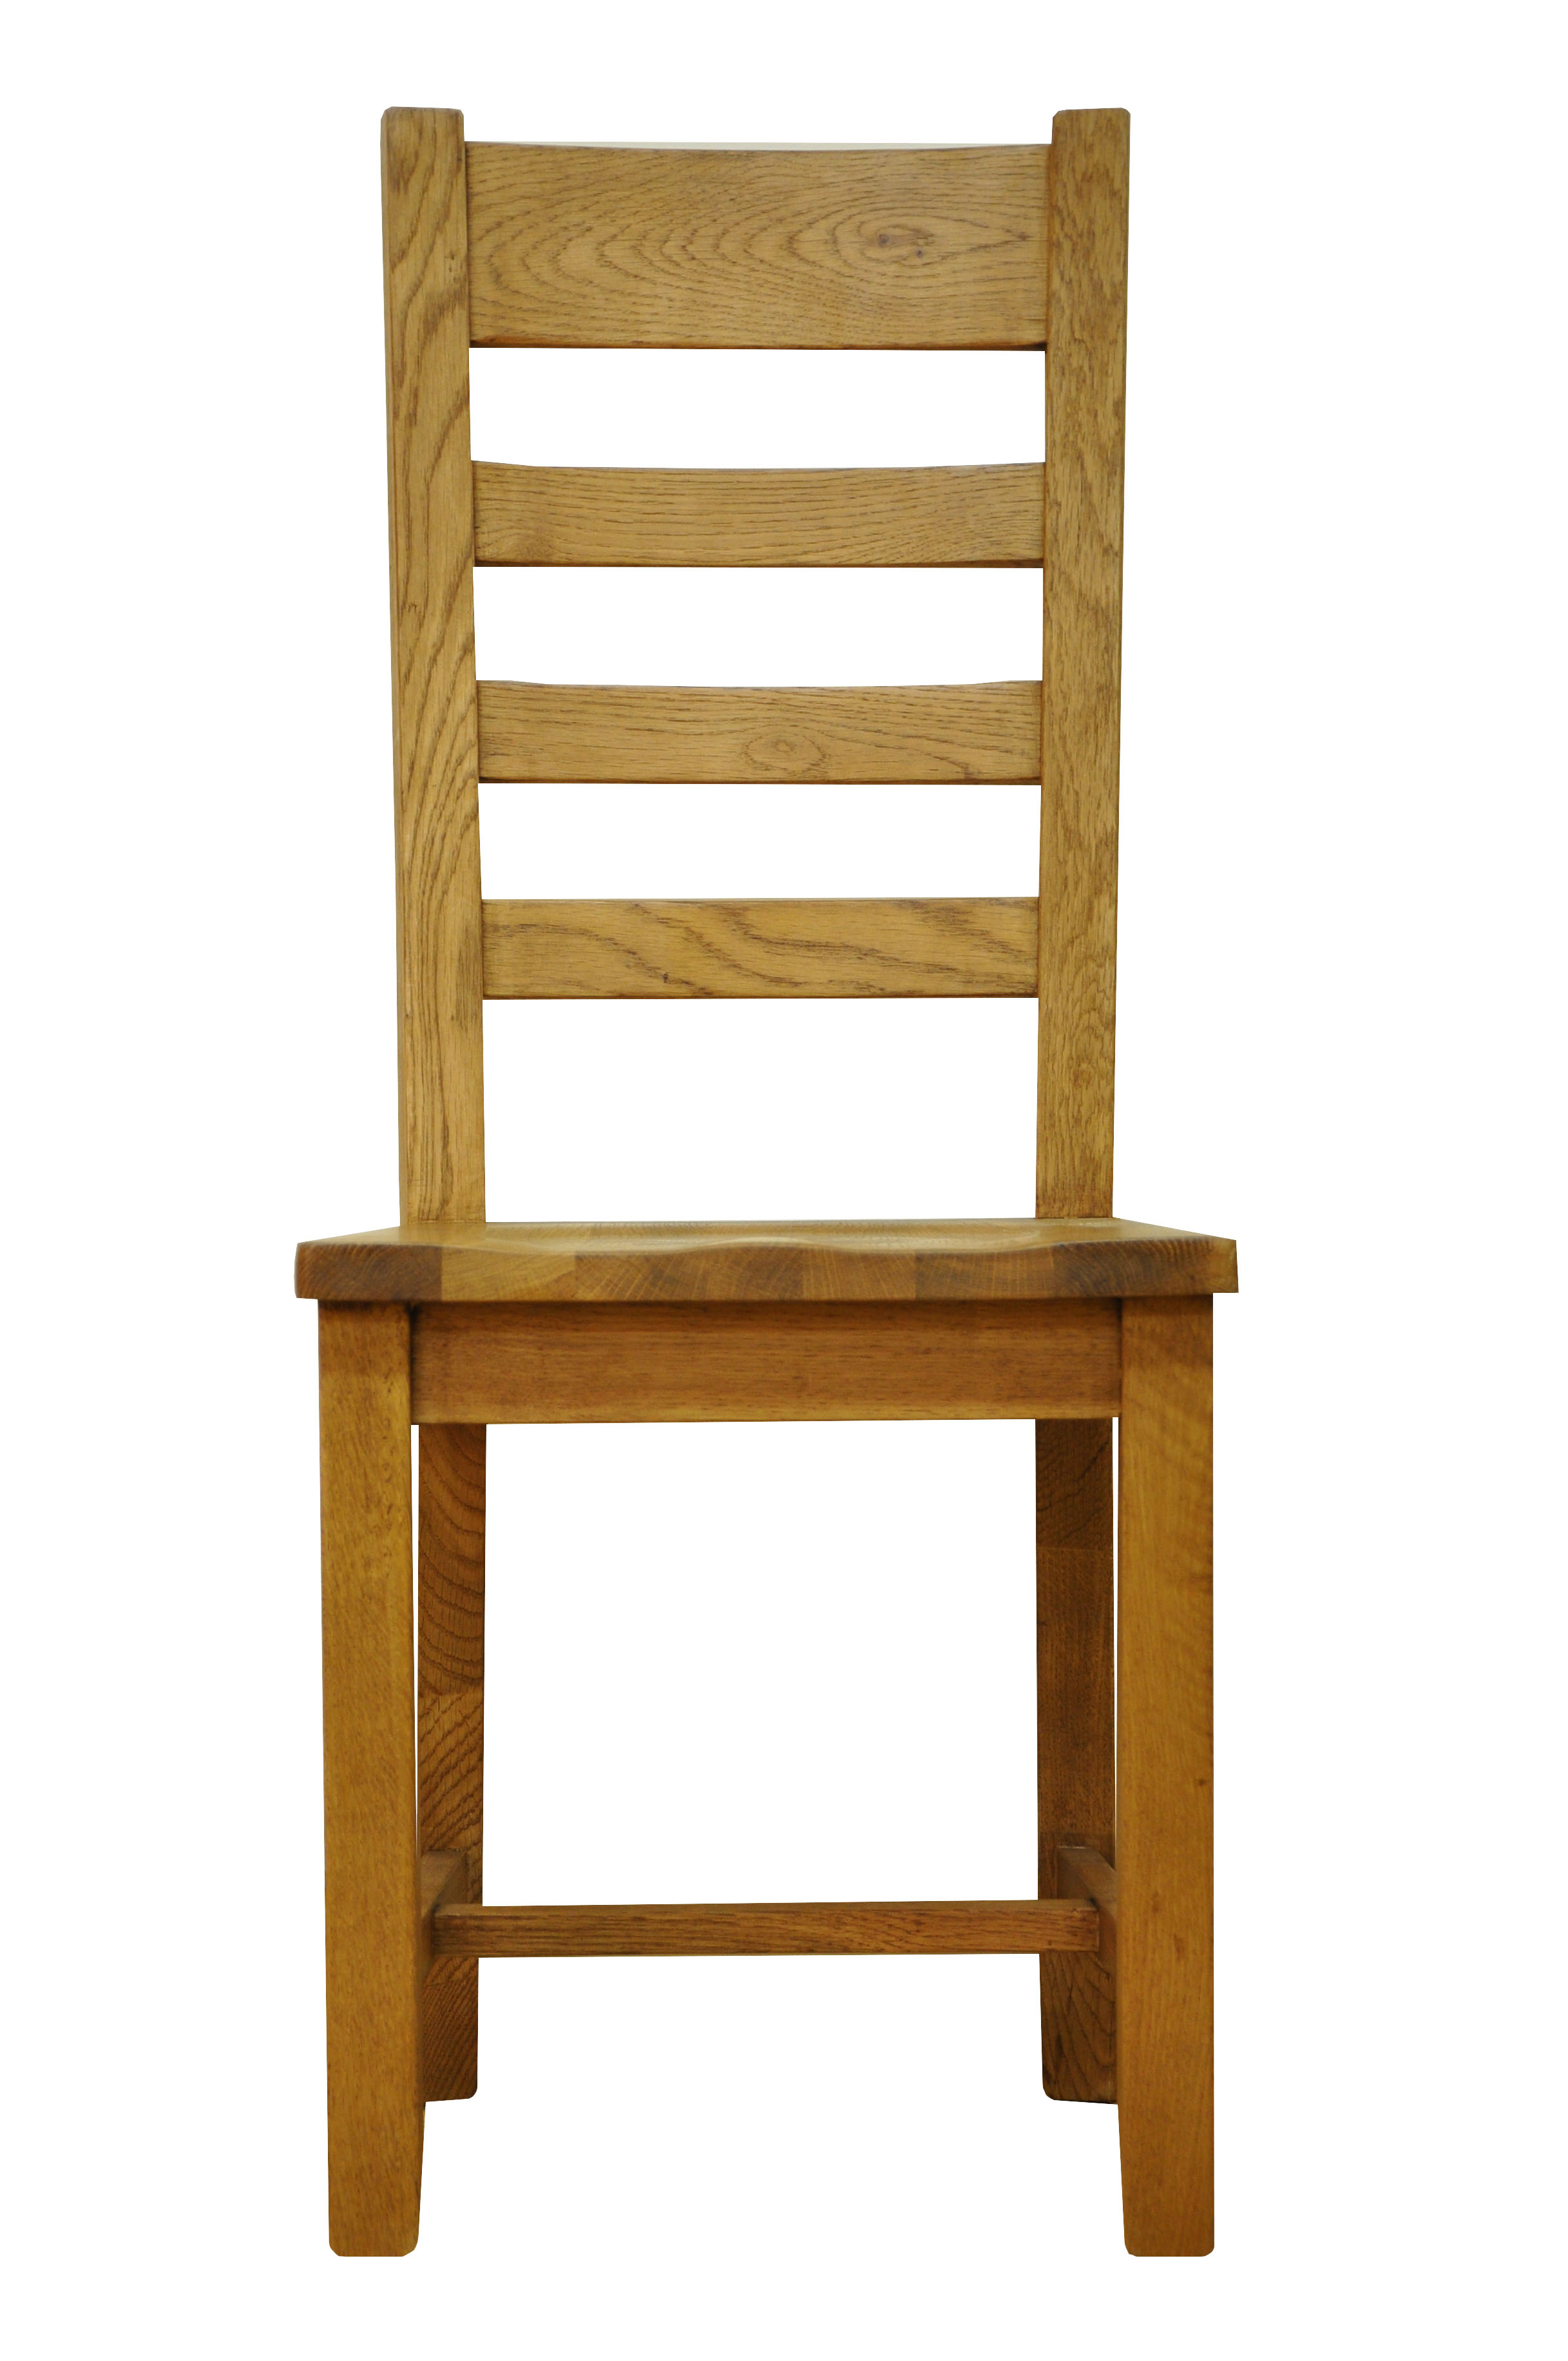 Kettle Stamford Ladder Back Chair Wooden Seat